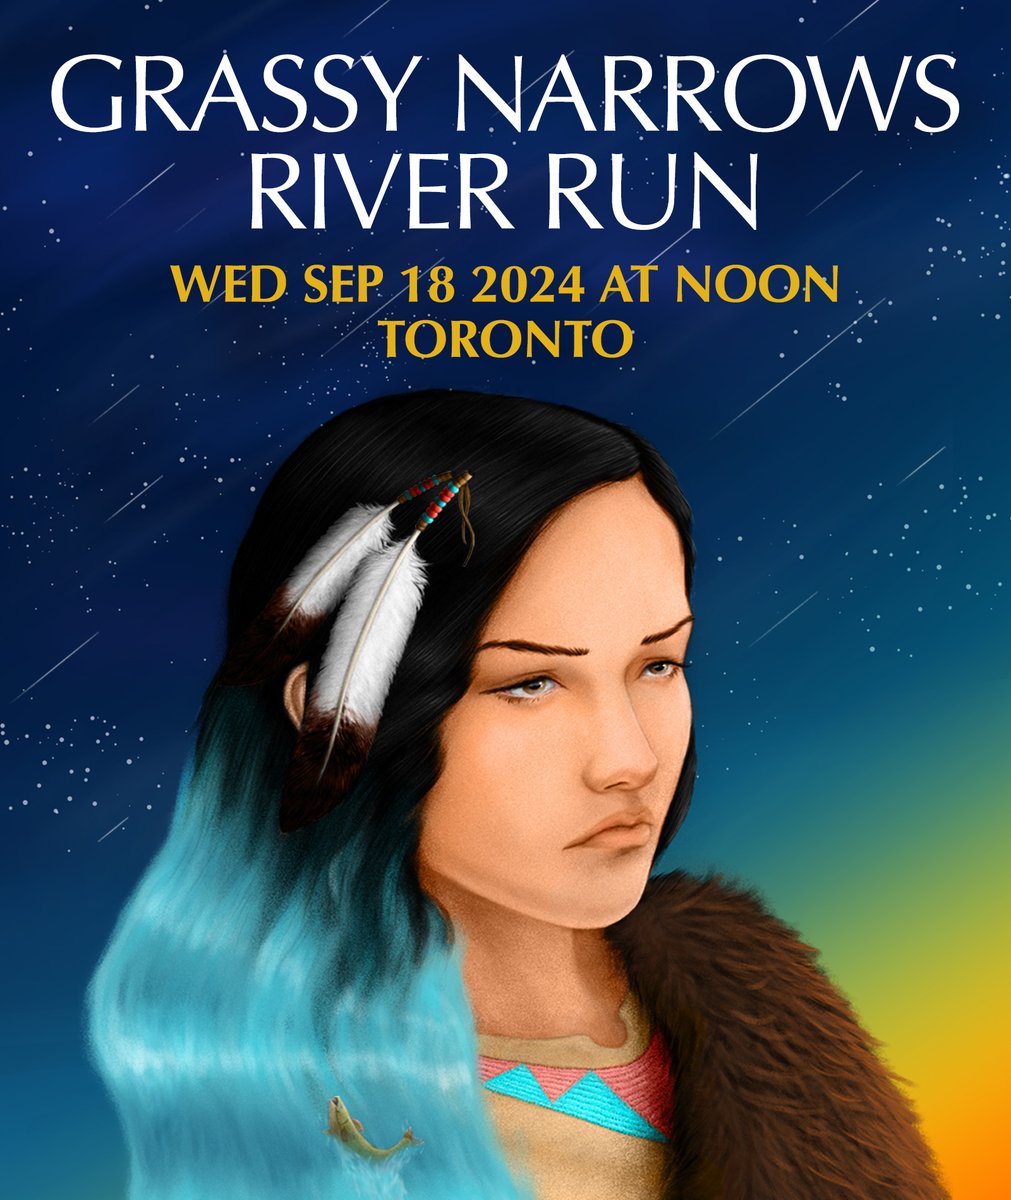 SAVE THE DATE! On September 18 in Toronto join #GrassyNarrows youth, elders, and community members marching for Mercury Justice! #FreeGrassy #RiverRun2024 RSVP here: freegrassy.net/grassy-narrows…